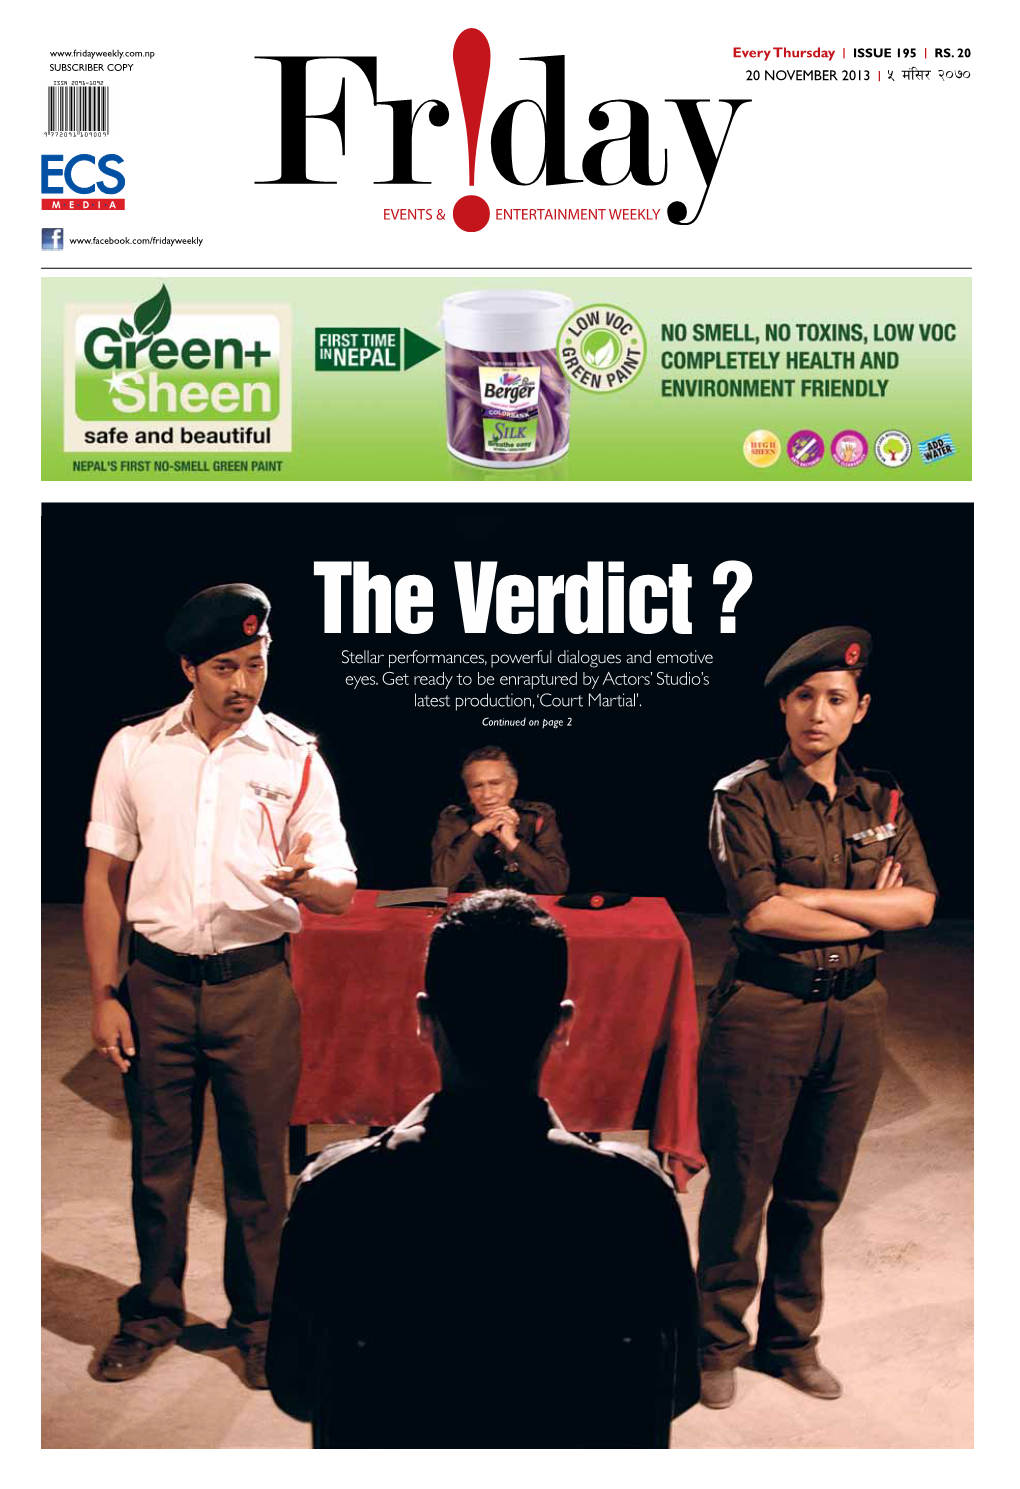 The Verdict ? Stellar Performances, Powerful Dialogues and Emotive Eyes